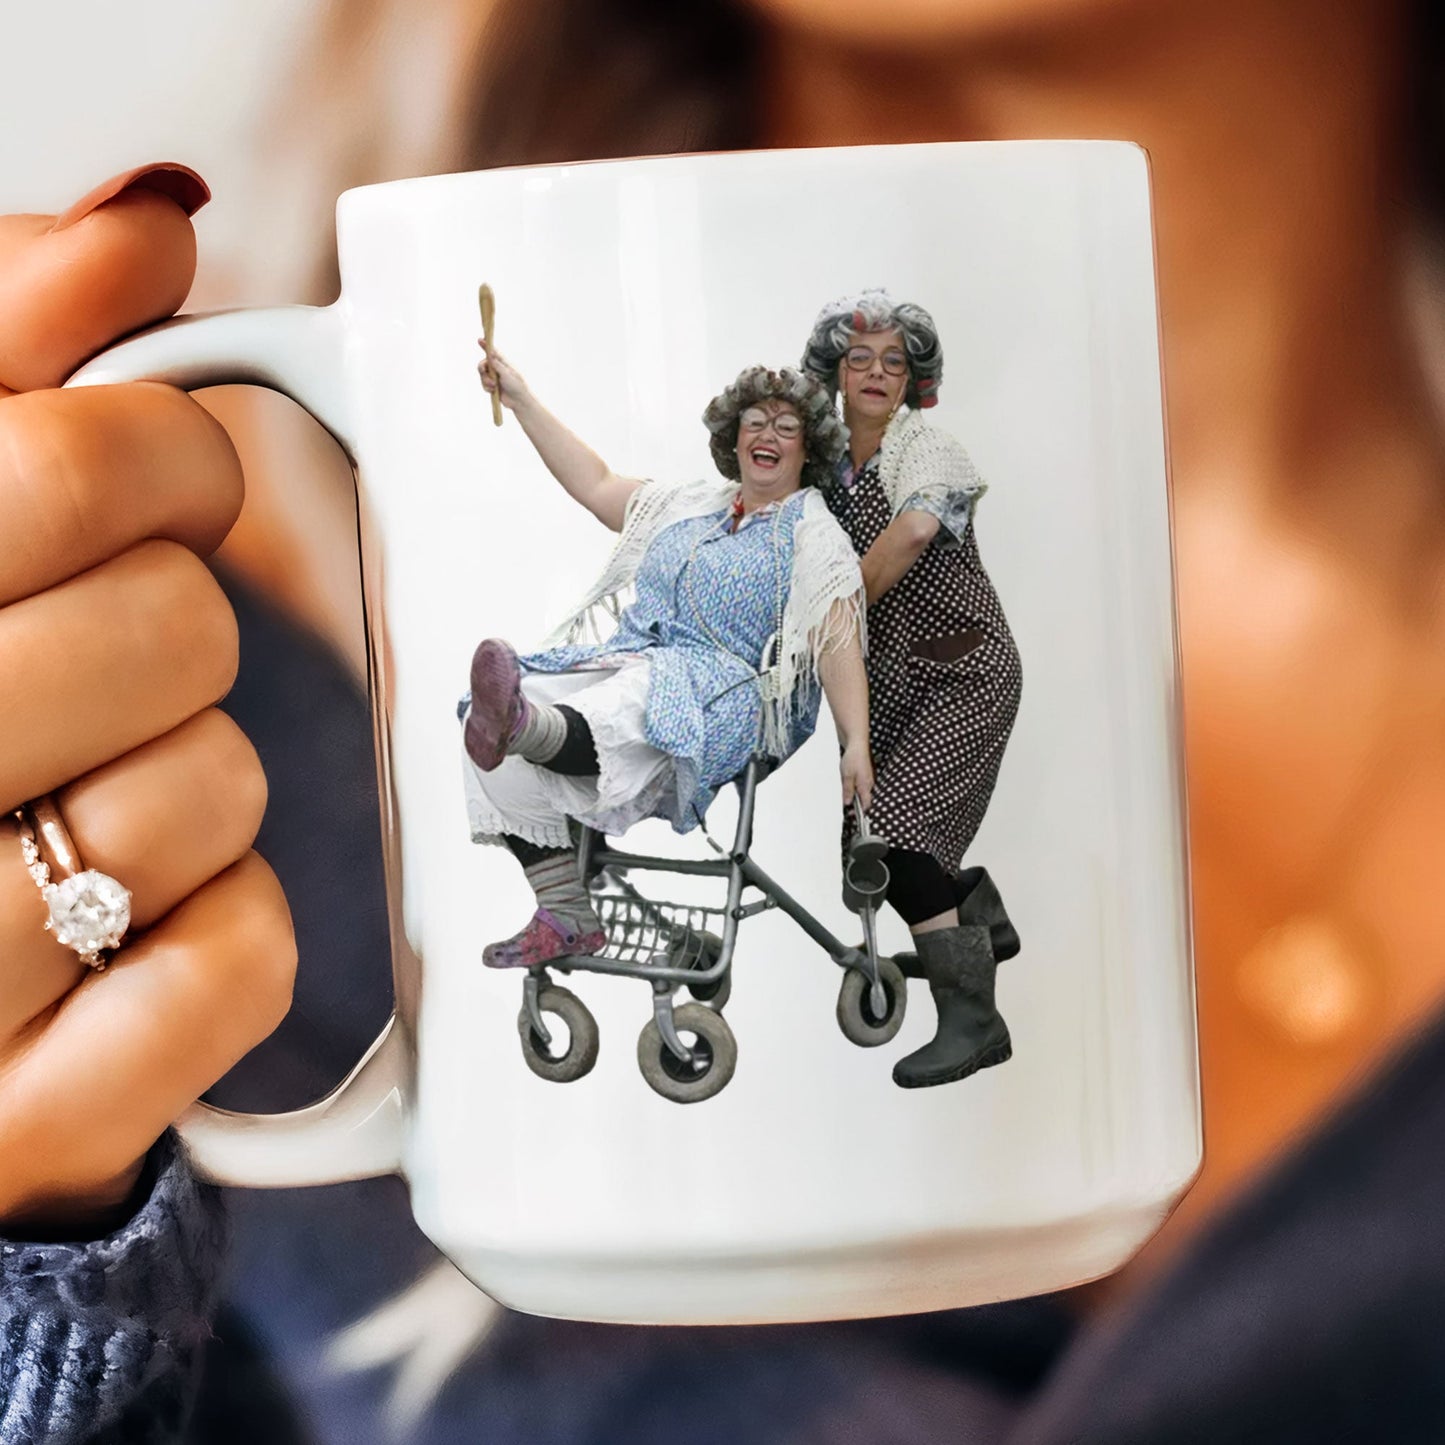 Being My Bestie Is The Only Gift You Need - Personalized Photo Mug